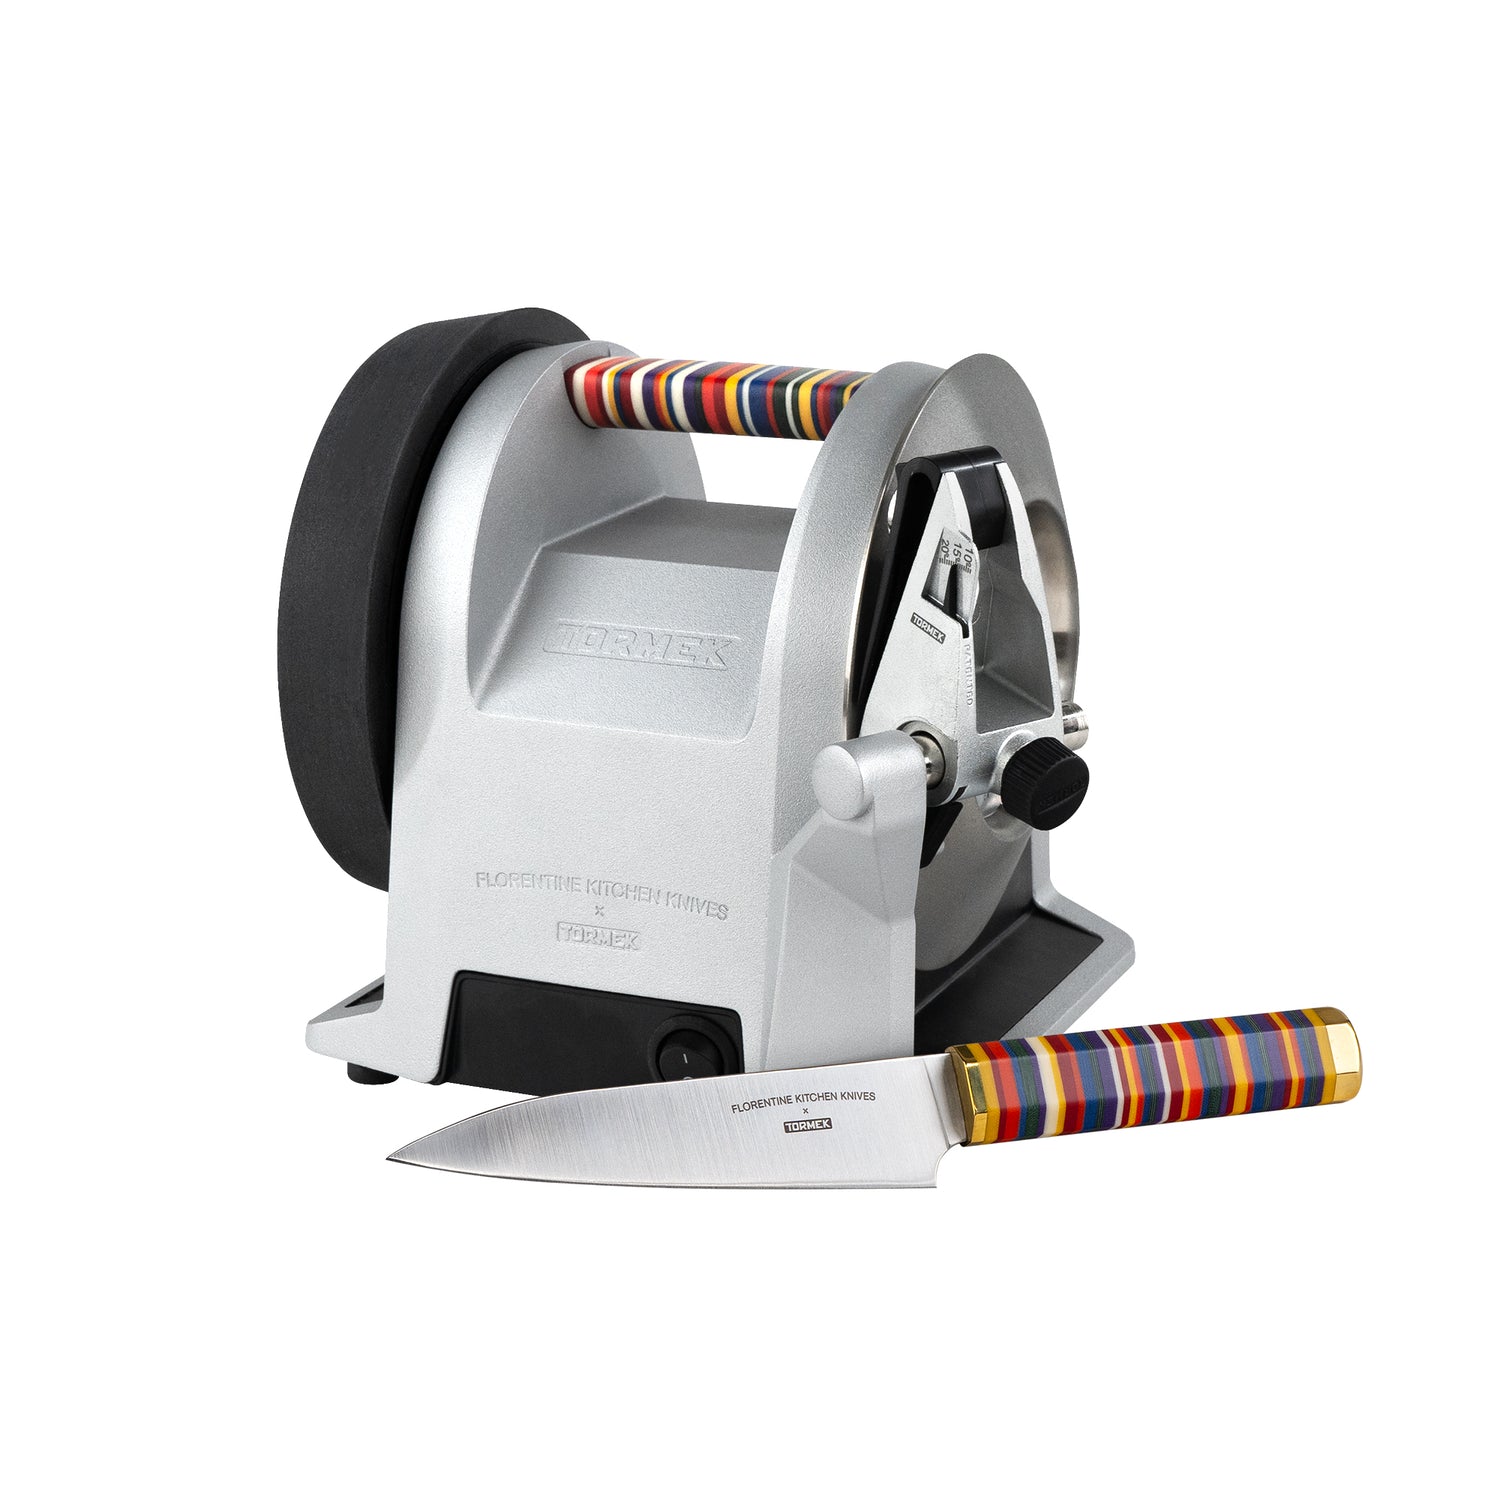 The Tormek T-1 Kitchen Knife Sharpener. Professional sharpness in your own  home #knifesharpening 